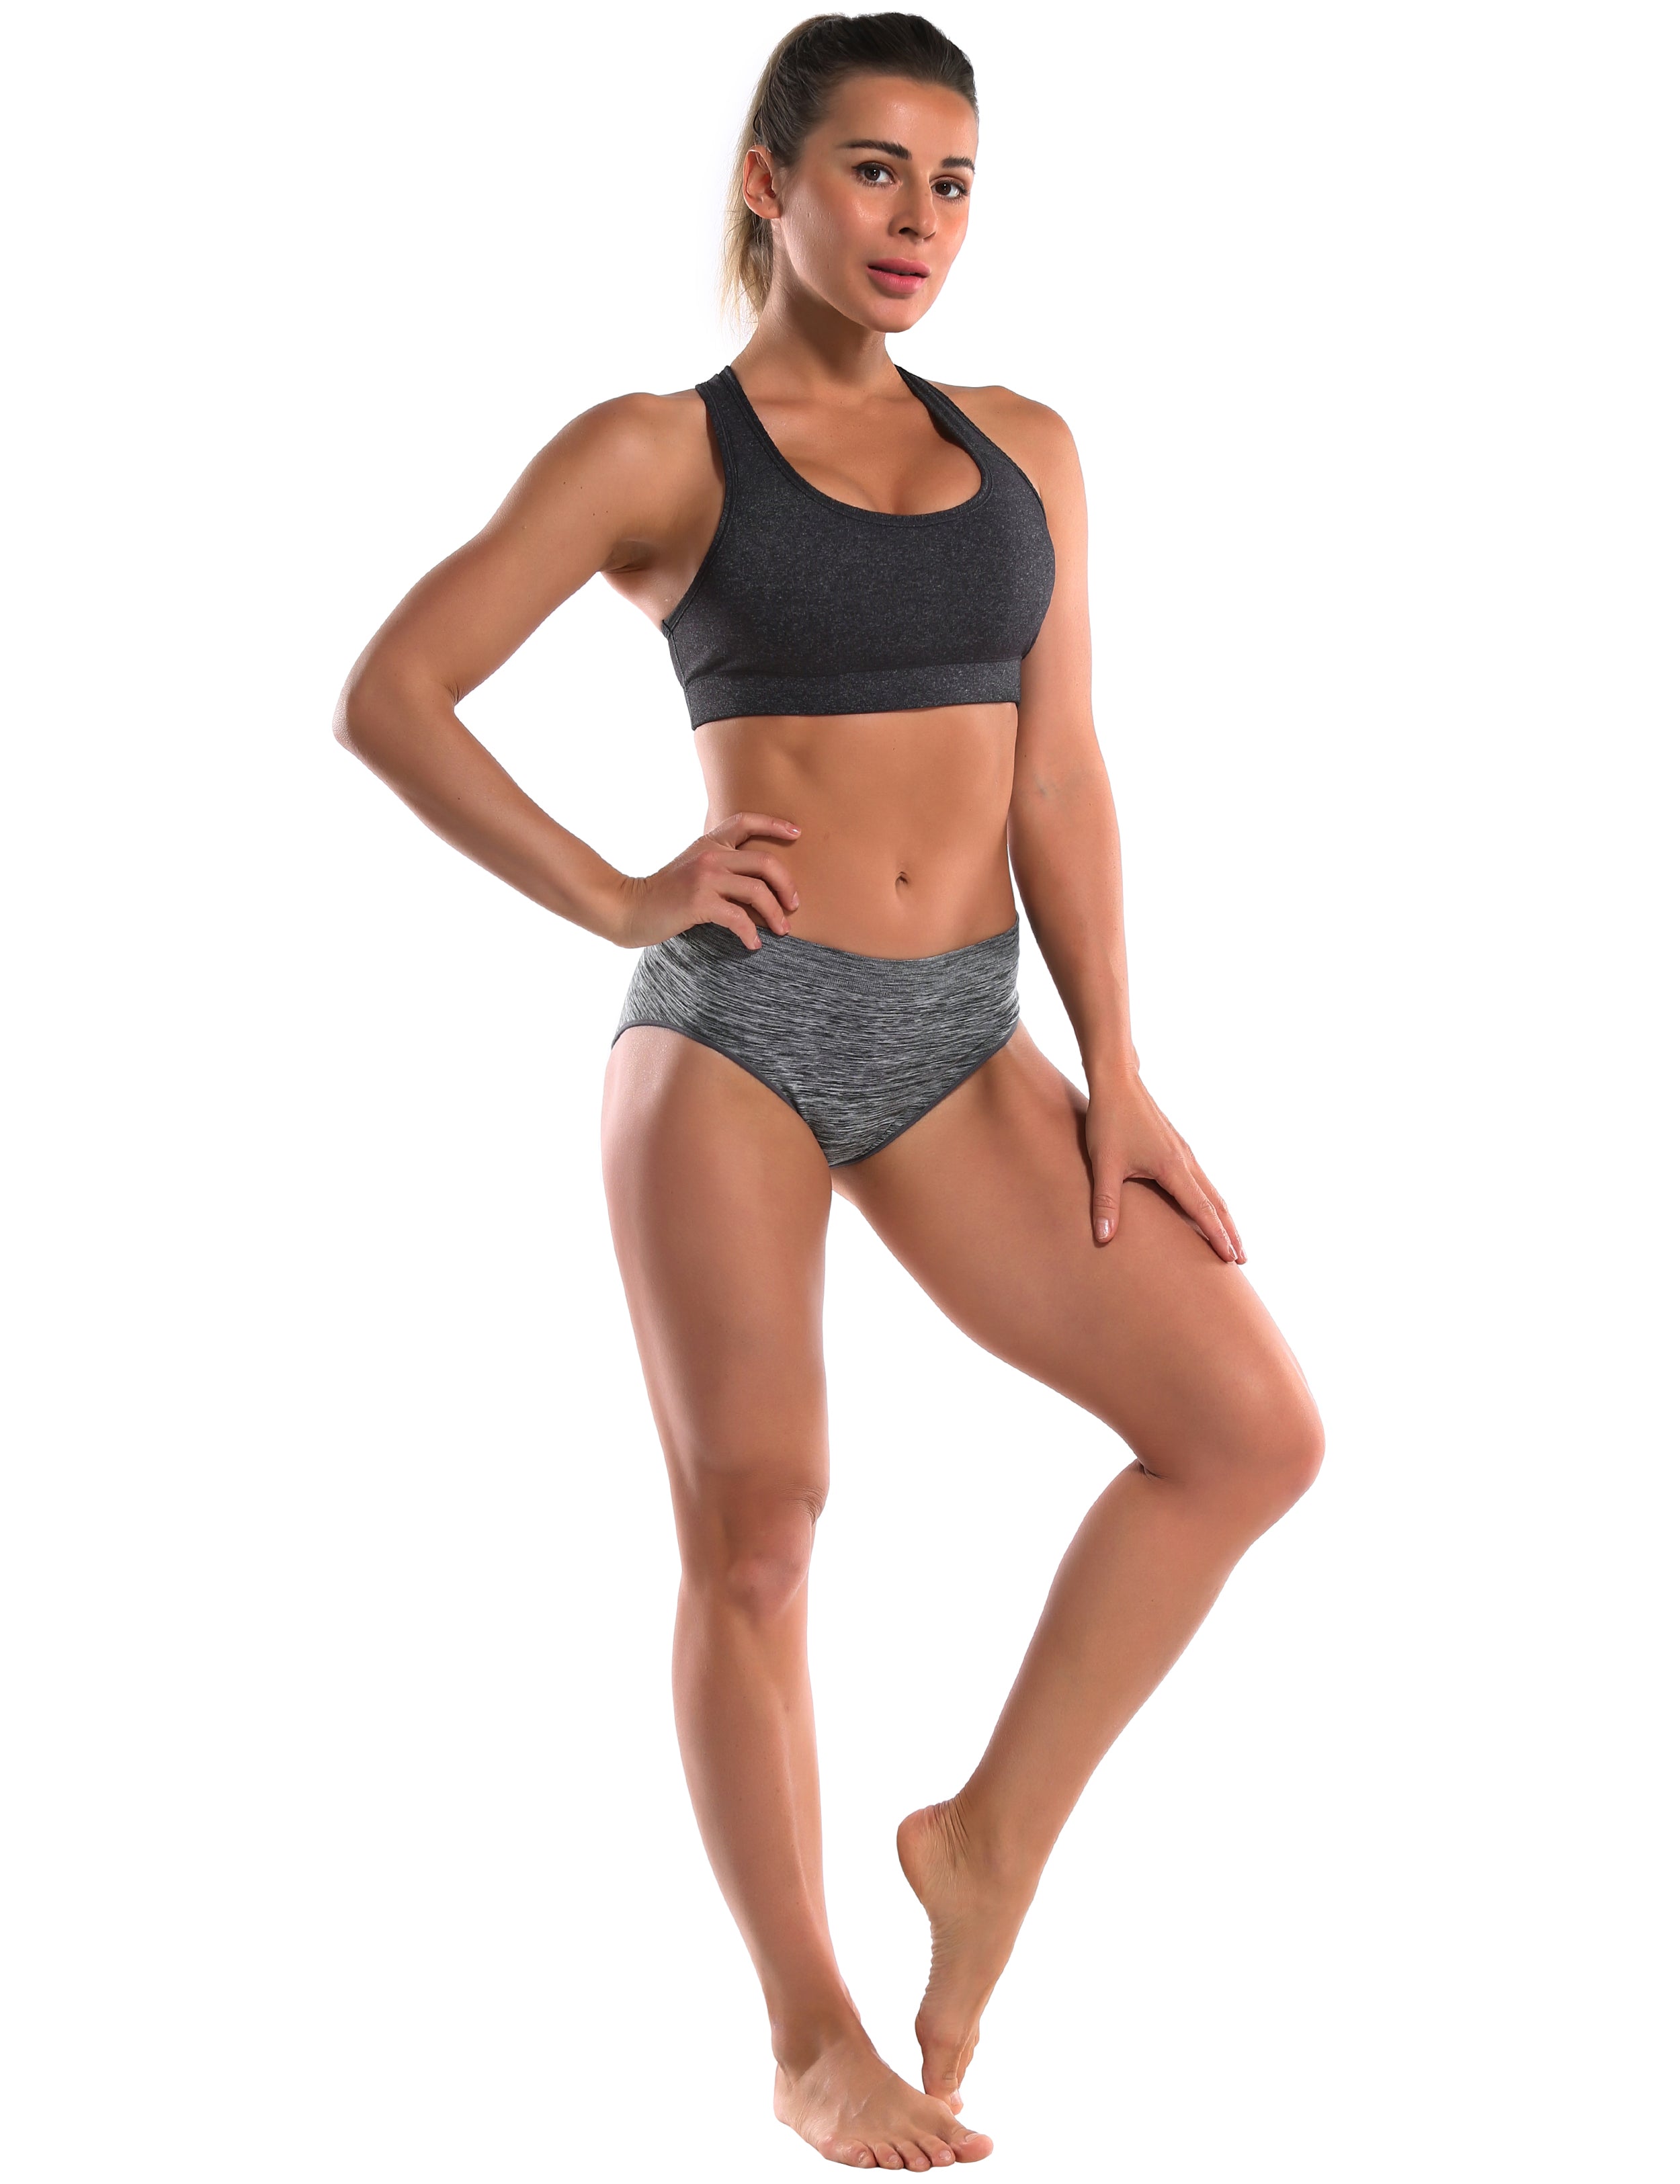 Seamless Sport Bikini Panties heathercharcoal Sleek, smooth and streamlined: designed in our extra-soft knit material, this seamless thong embraces everyday comfort. Here with an allover heathered effect. Weave threads one by one High elasticity Softest-ever fabric Unsealed Comfortable No back coverage Machine wash.